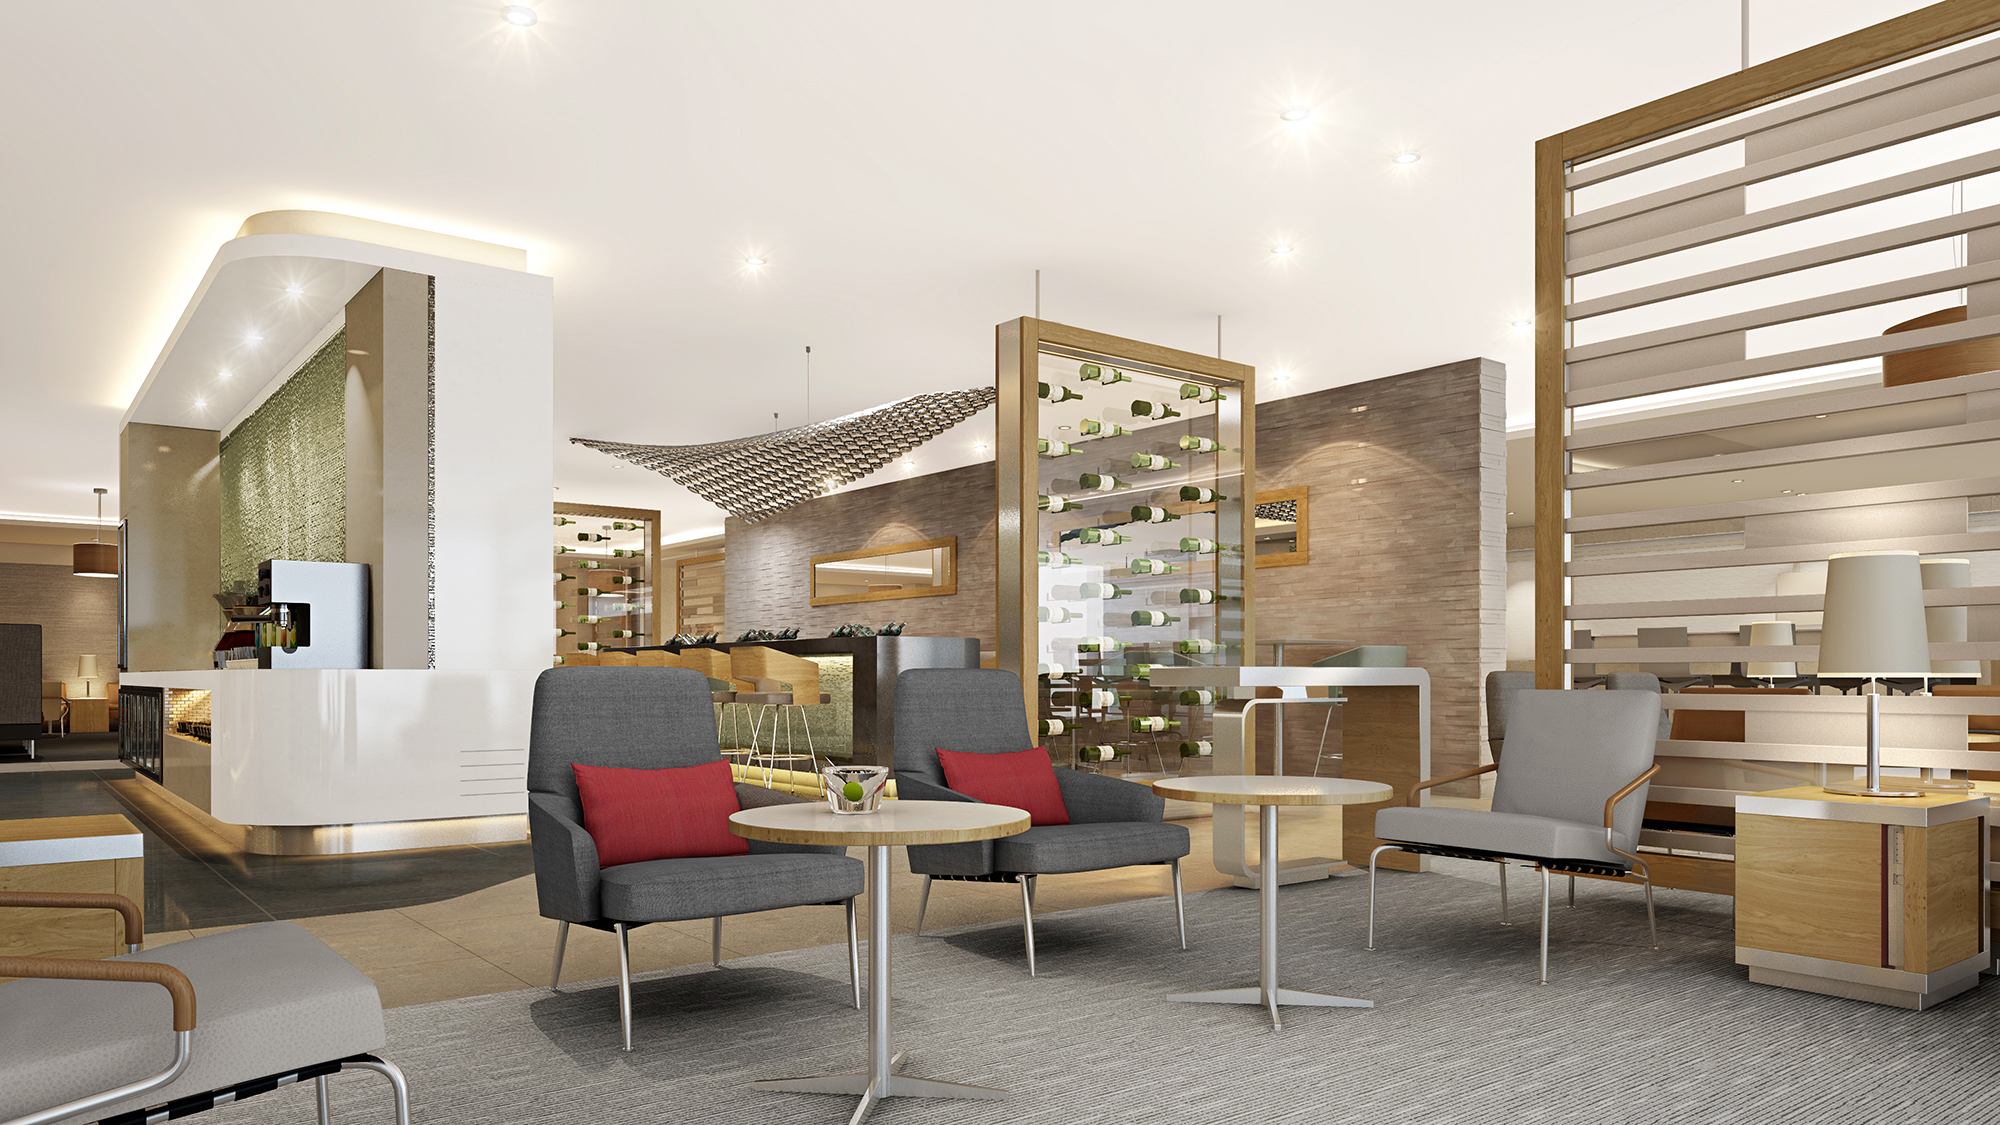 American Airlines Going BIG On Flagship Lounge Upgrades & Expansion